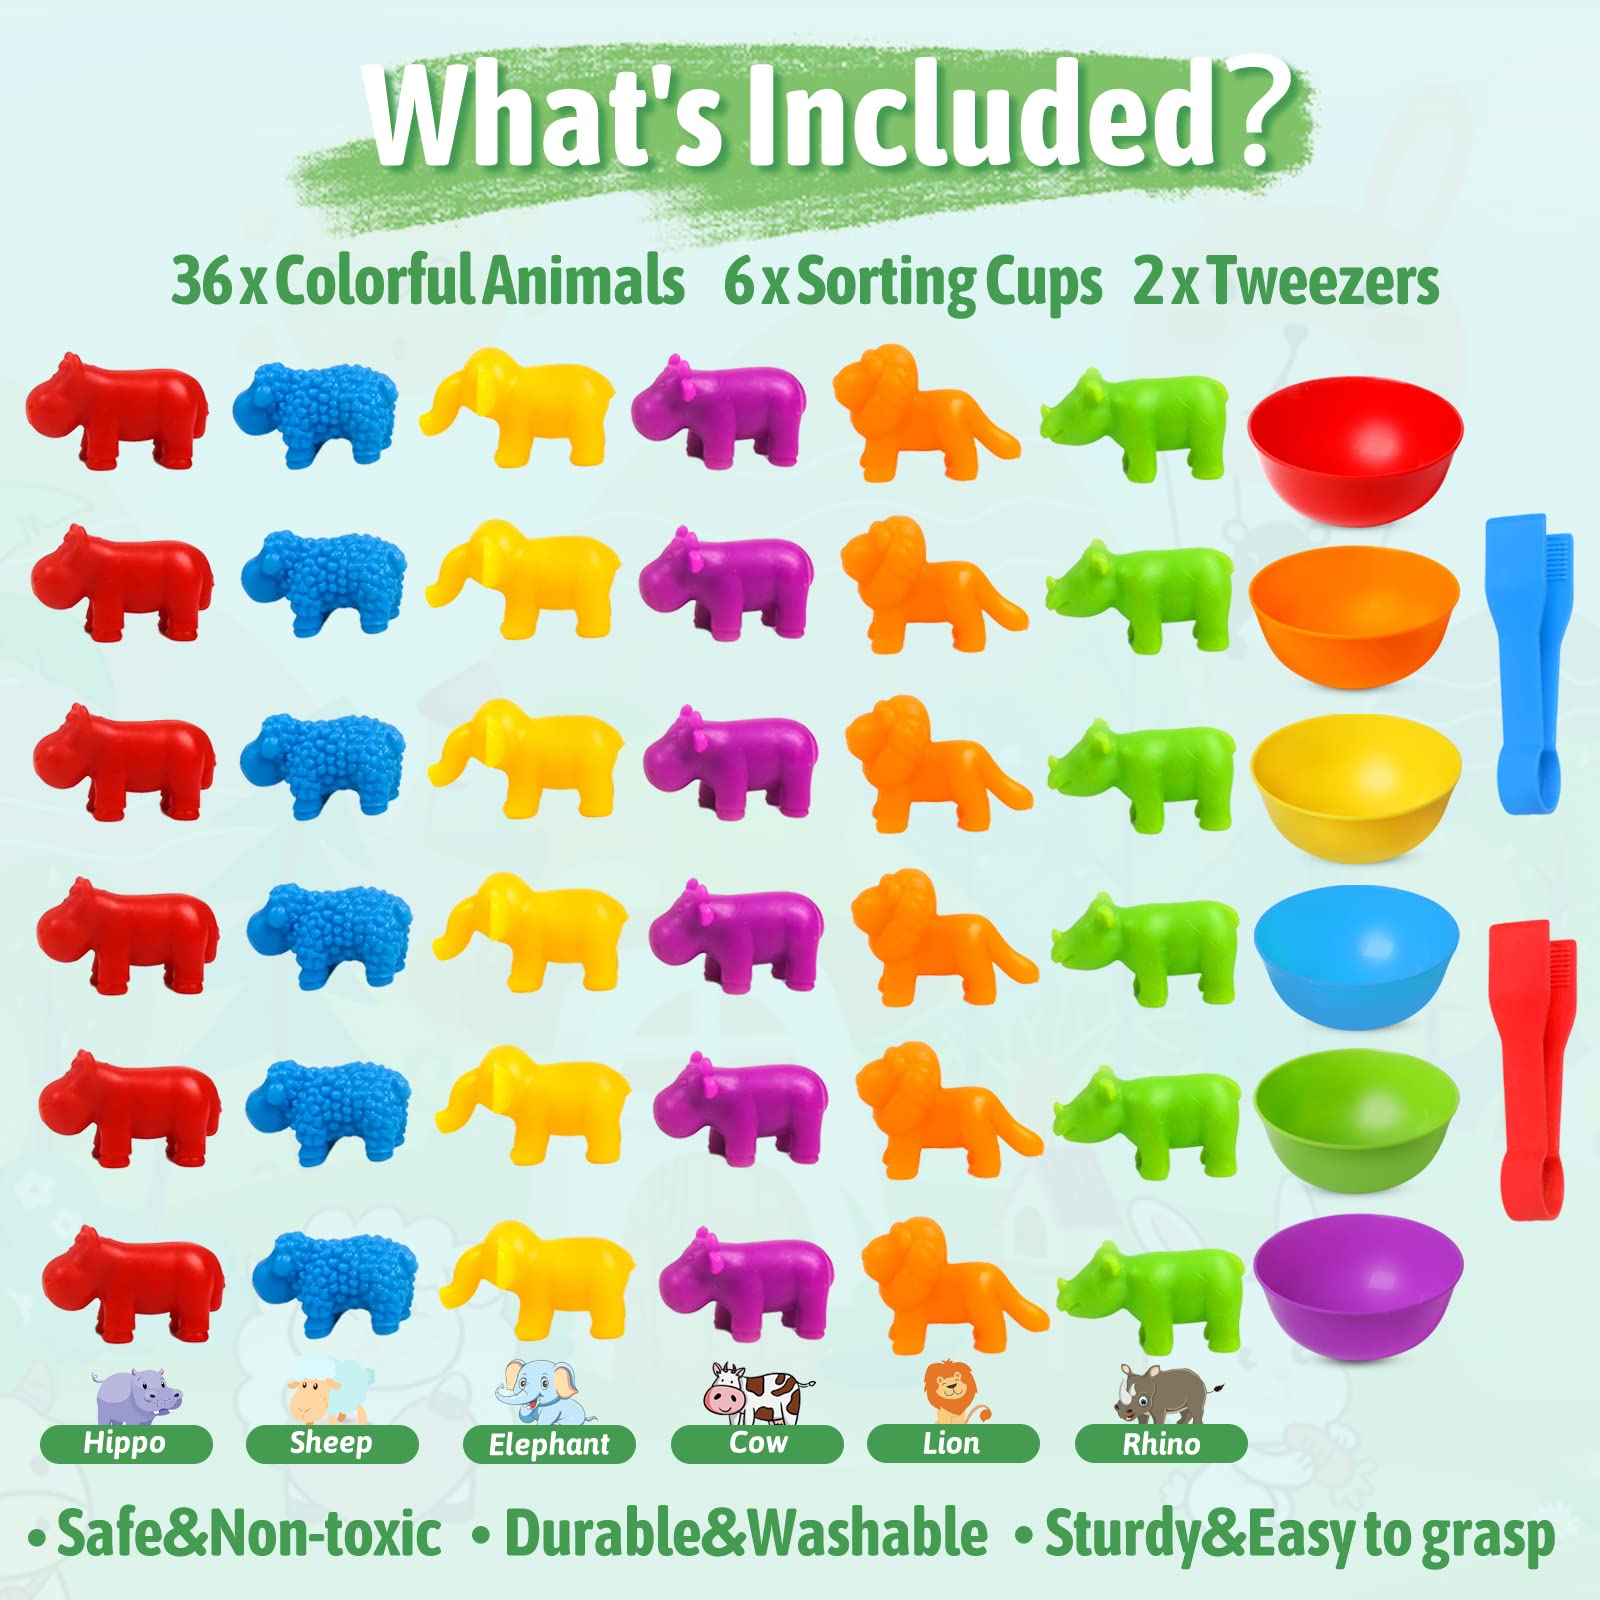 Counting Animals Matching Games Color Sorting Stacking Toys with Bowls Preschool Learning Activities Educational Sensory Montessori STEM Toy Daycare Sets Gift for Toddlers Kids Boys Girls Aged 3+ Year